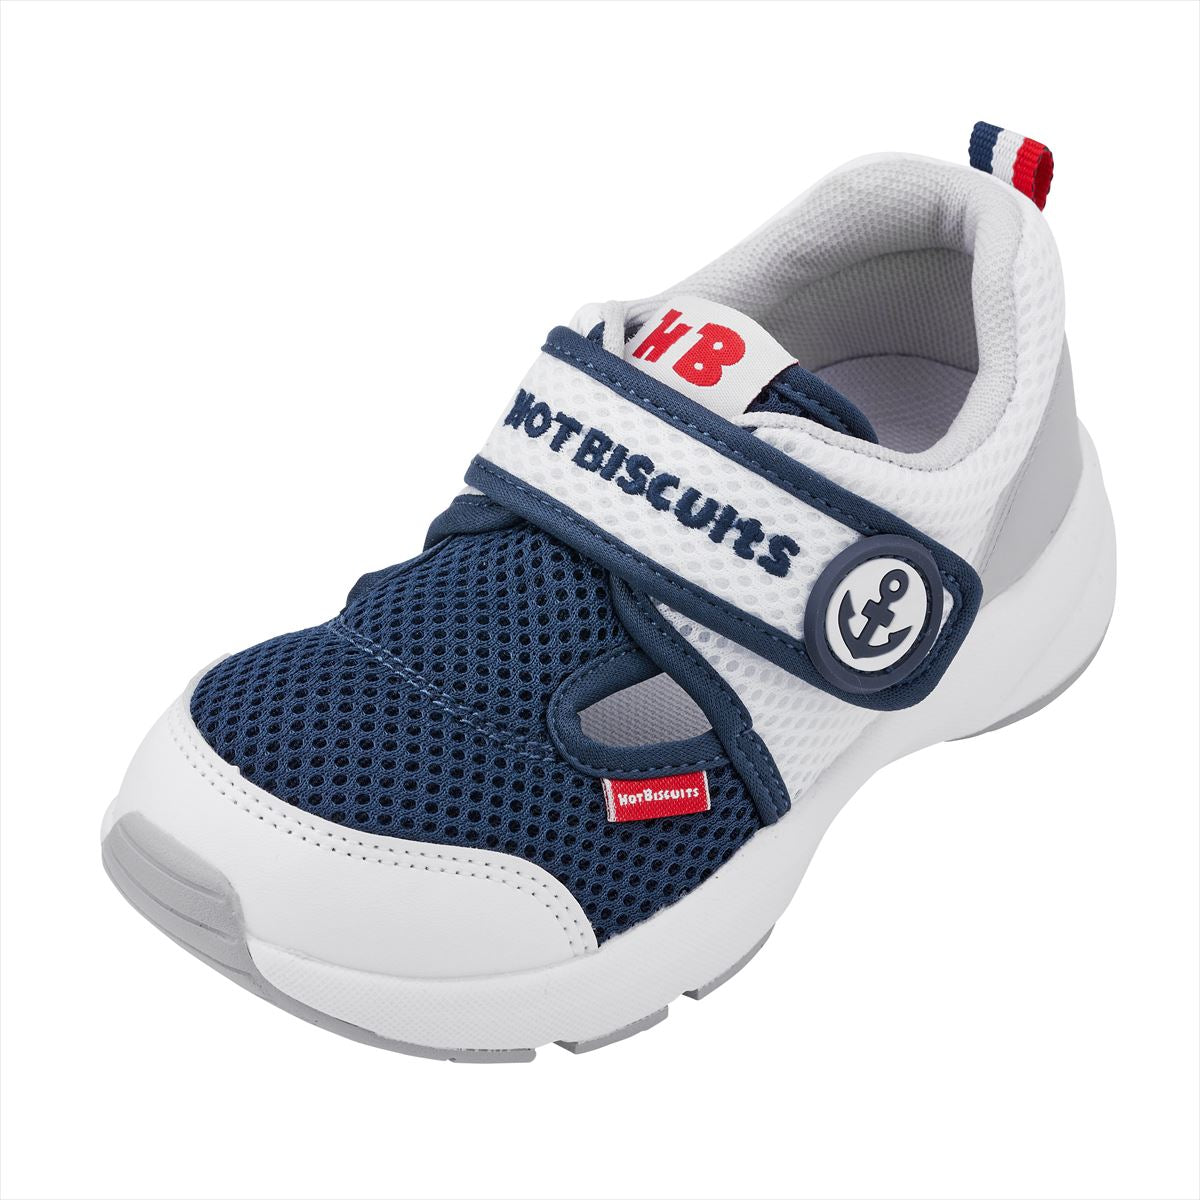 Double Russell Mesh Sneakers for Kids - HB Marine